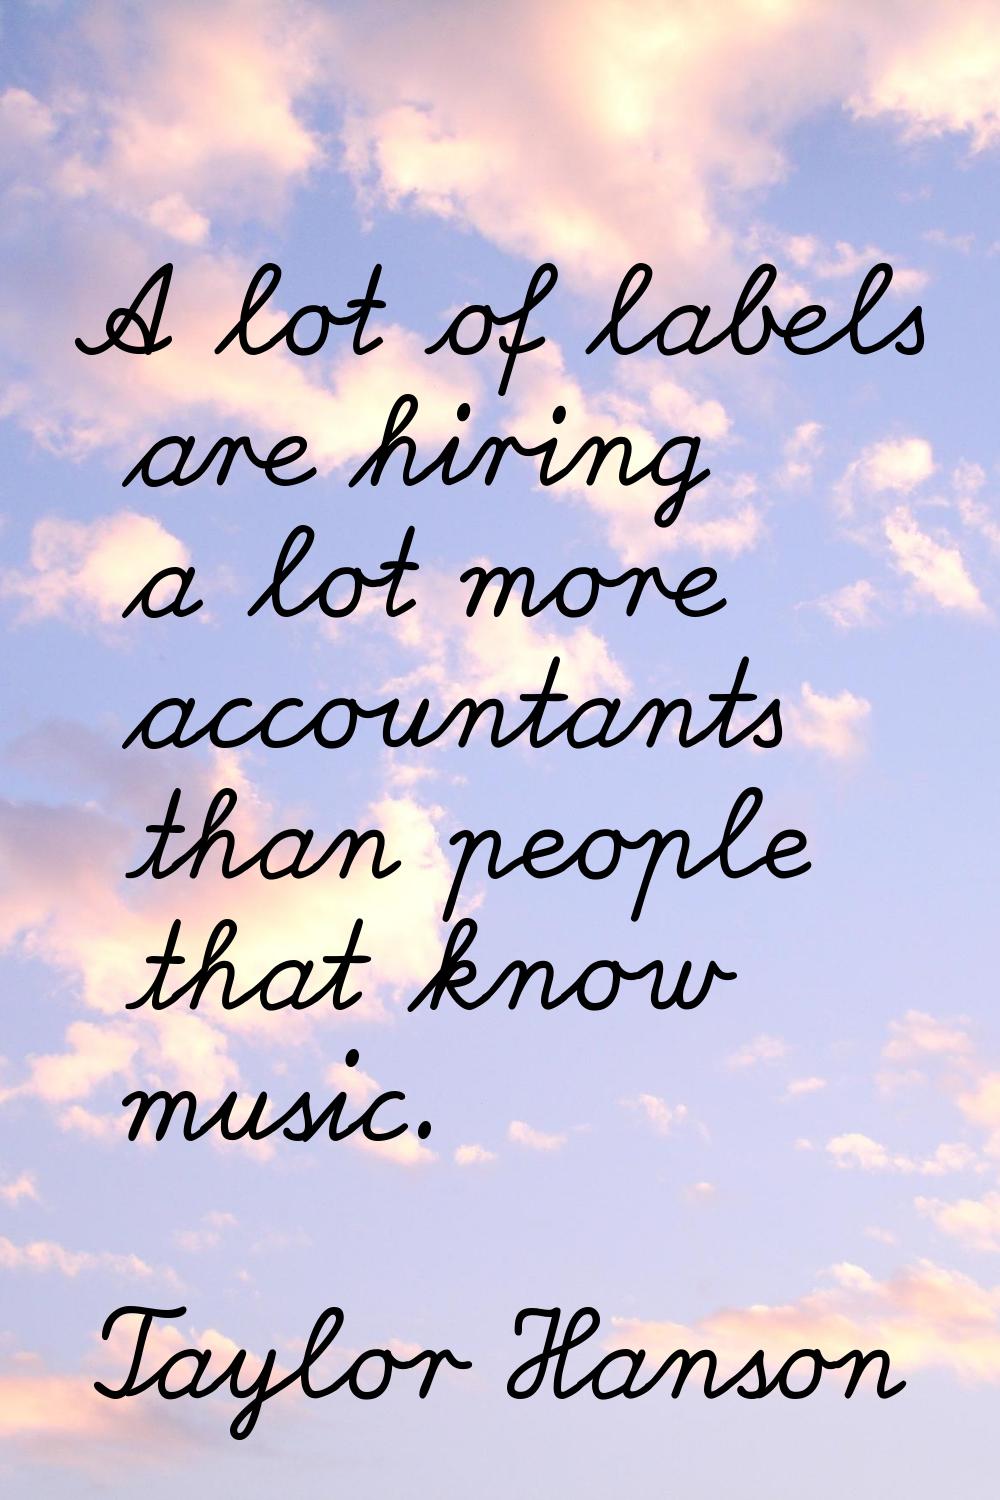 A lot of labels are hiring a lot more accountants than people that know music.